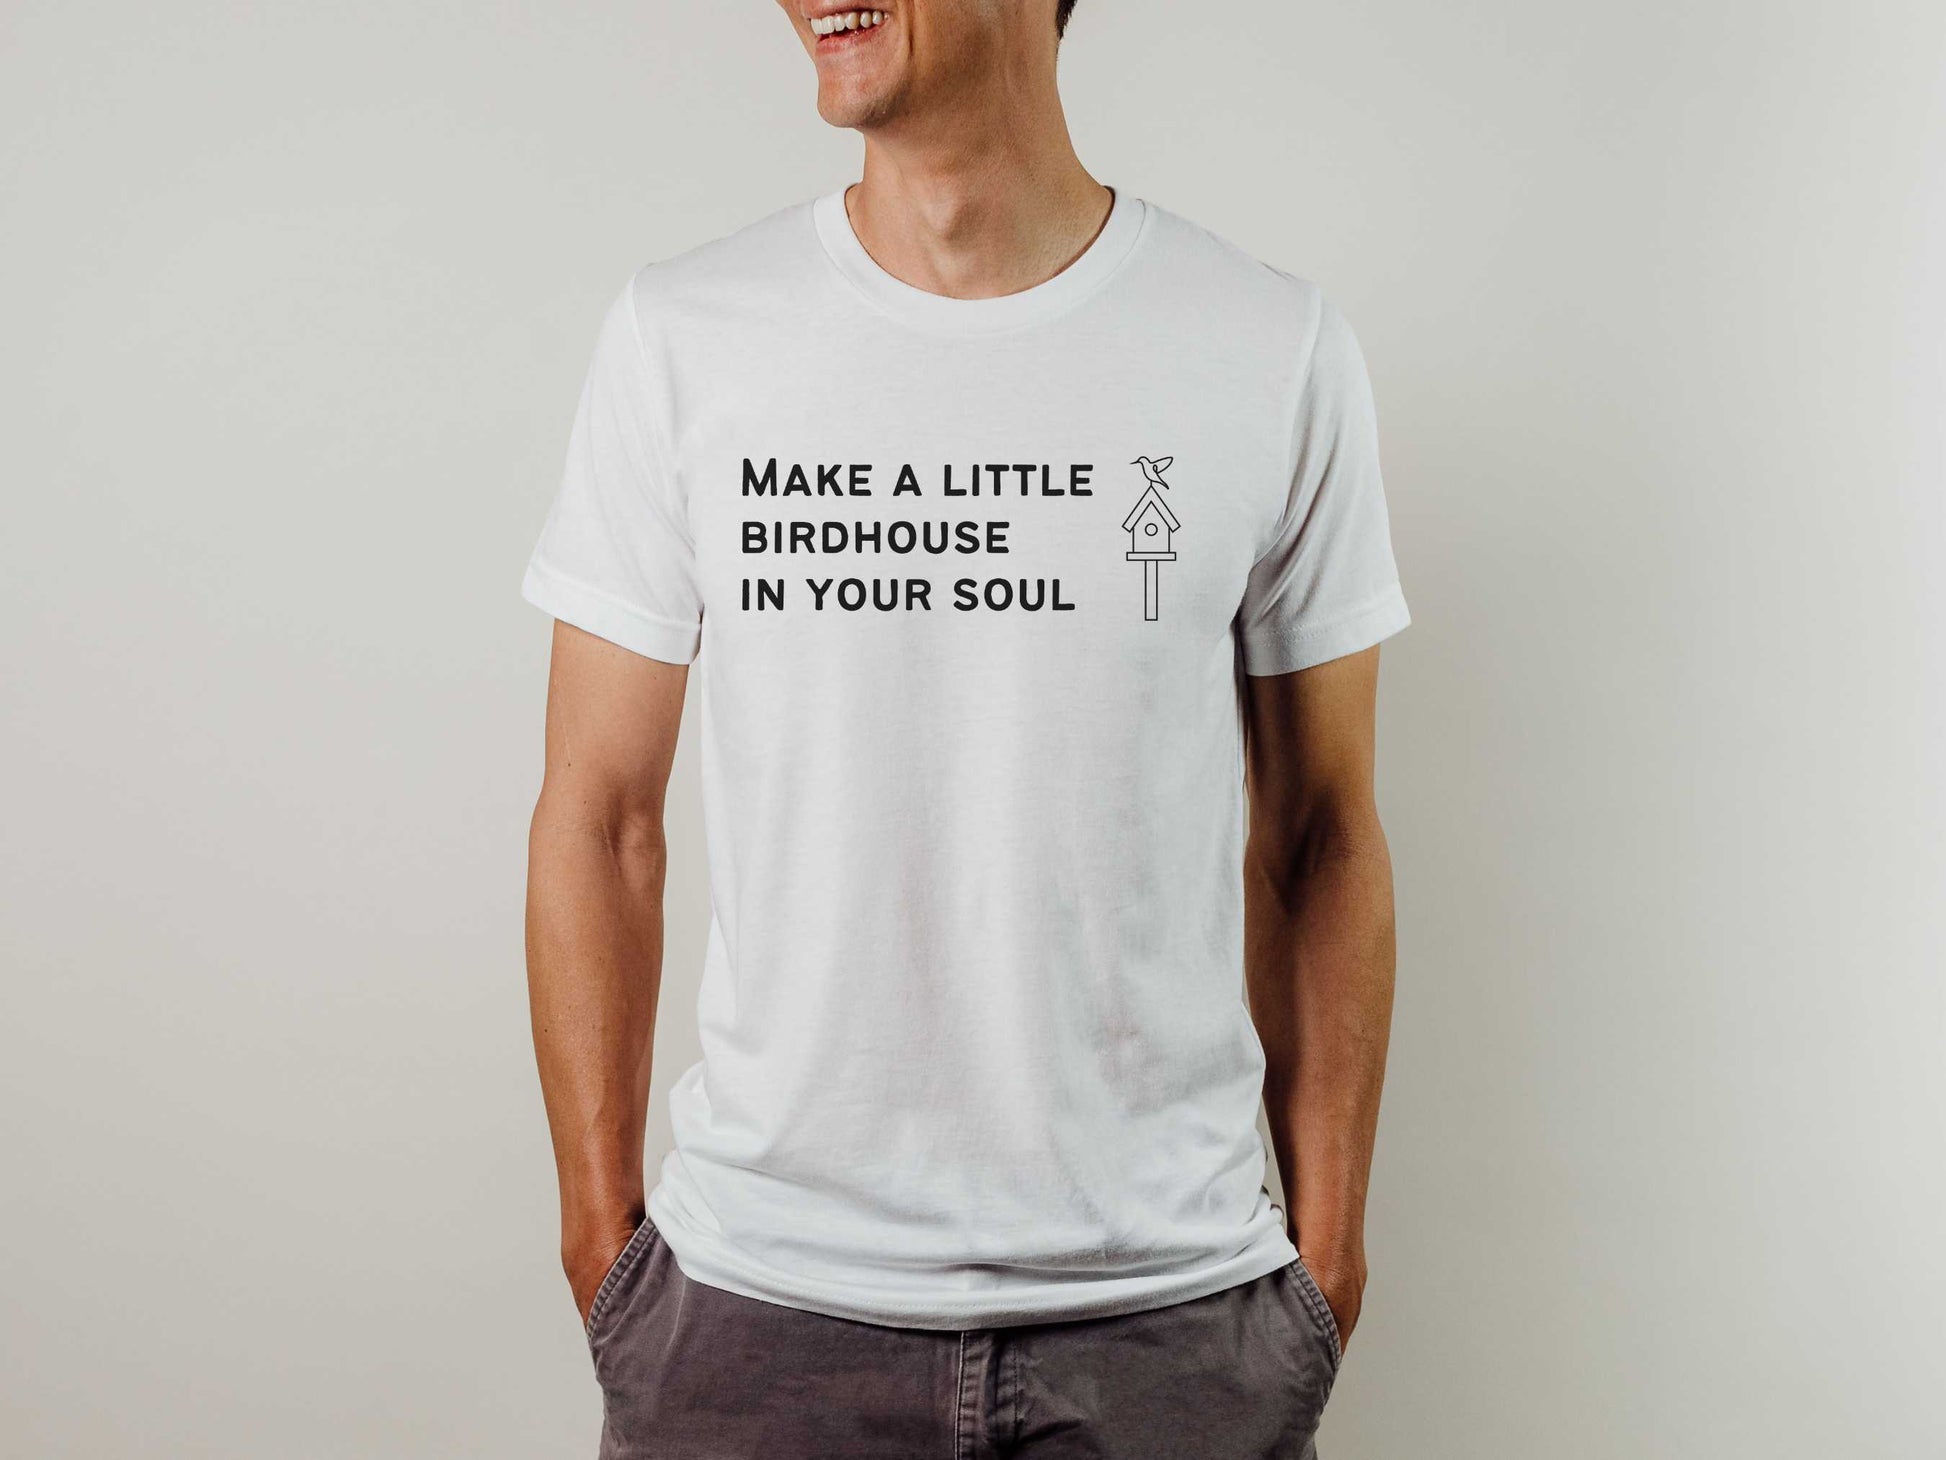 Make a Little Birdhouse in Your Soul TMBG T-Shirt in White on a Man